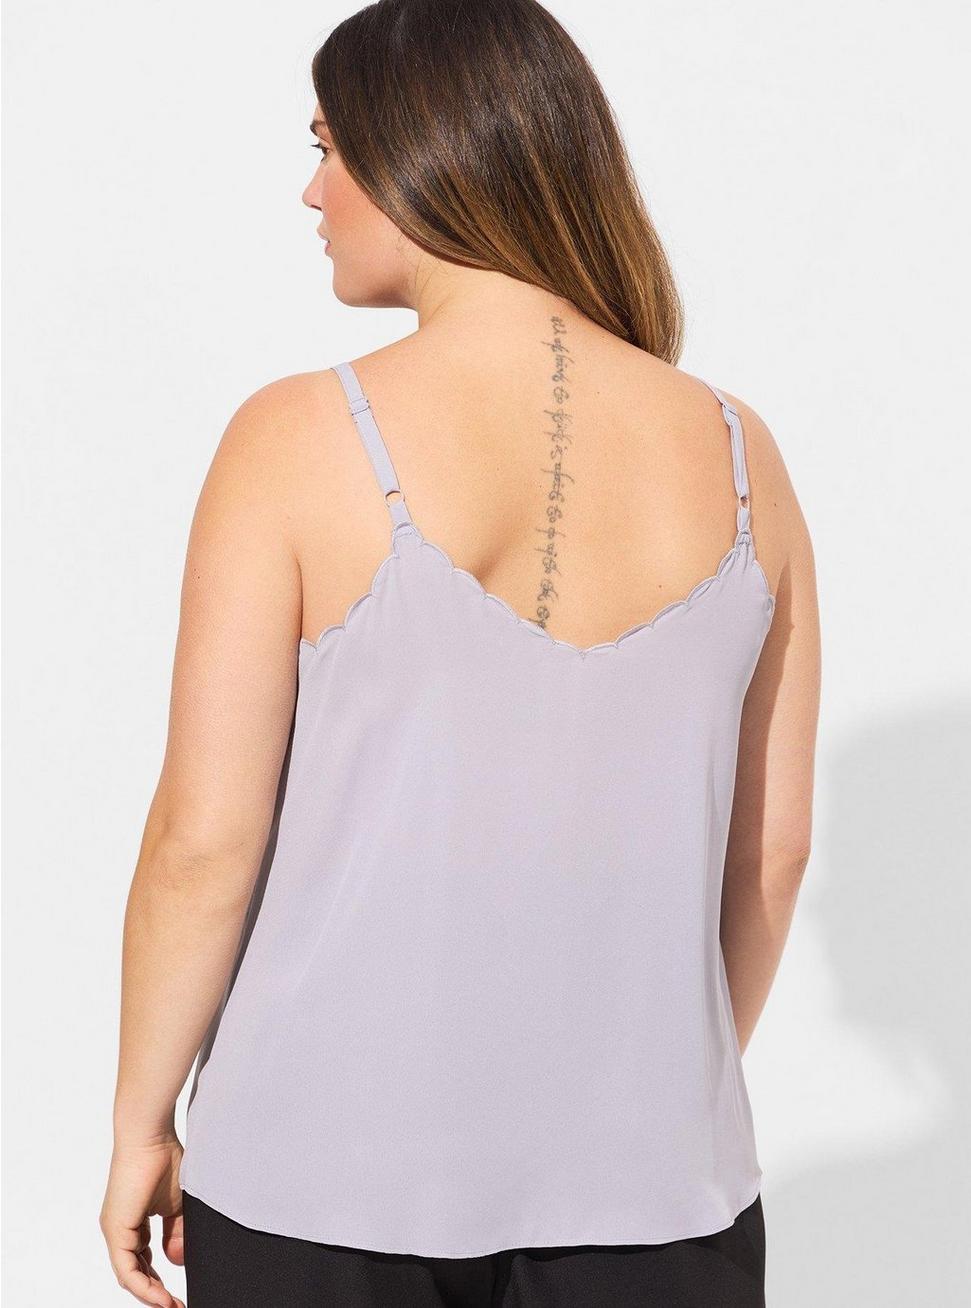 Sophie Georgette Embroidered Cami, LILAC GRAY, alternate